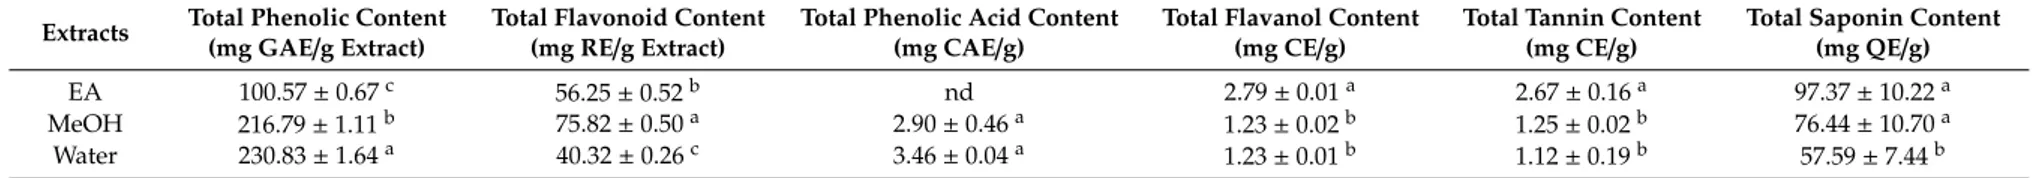 Table 1. Total bioactive components of the tested samples. Extracts Total Phenolic Content